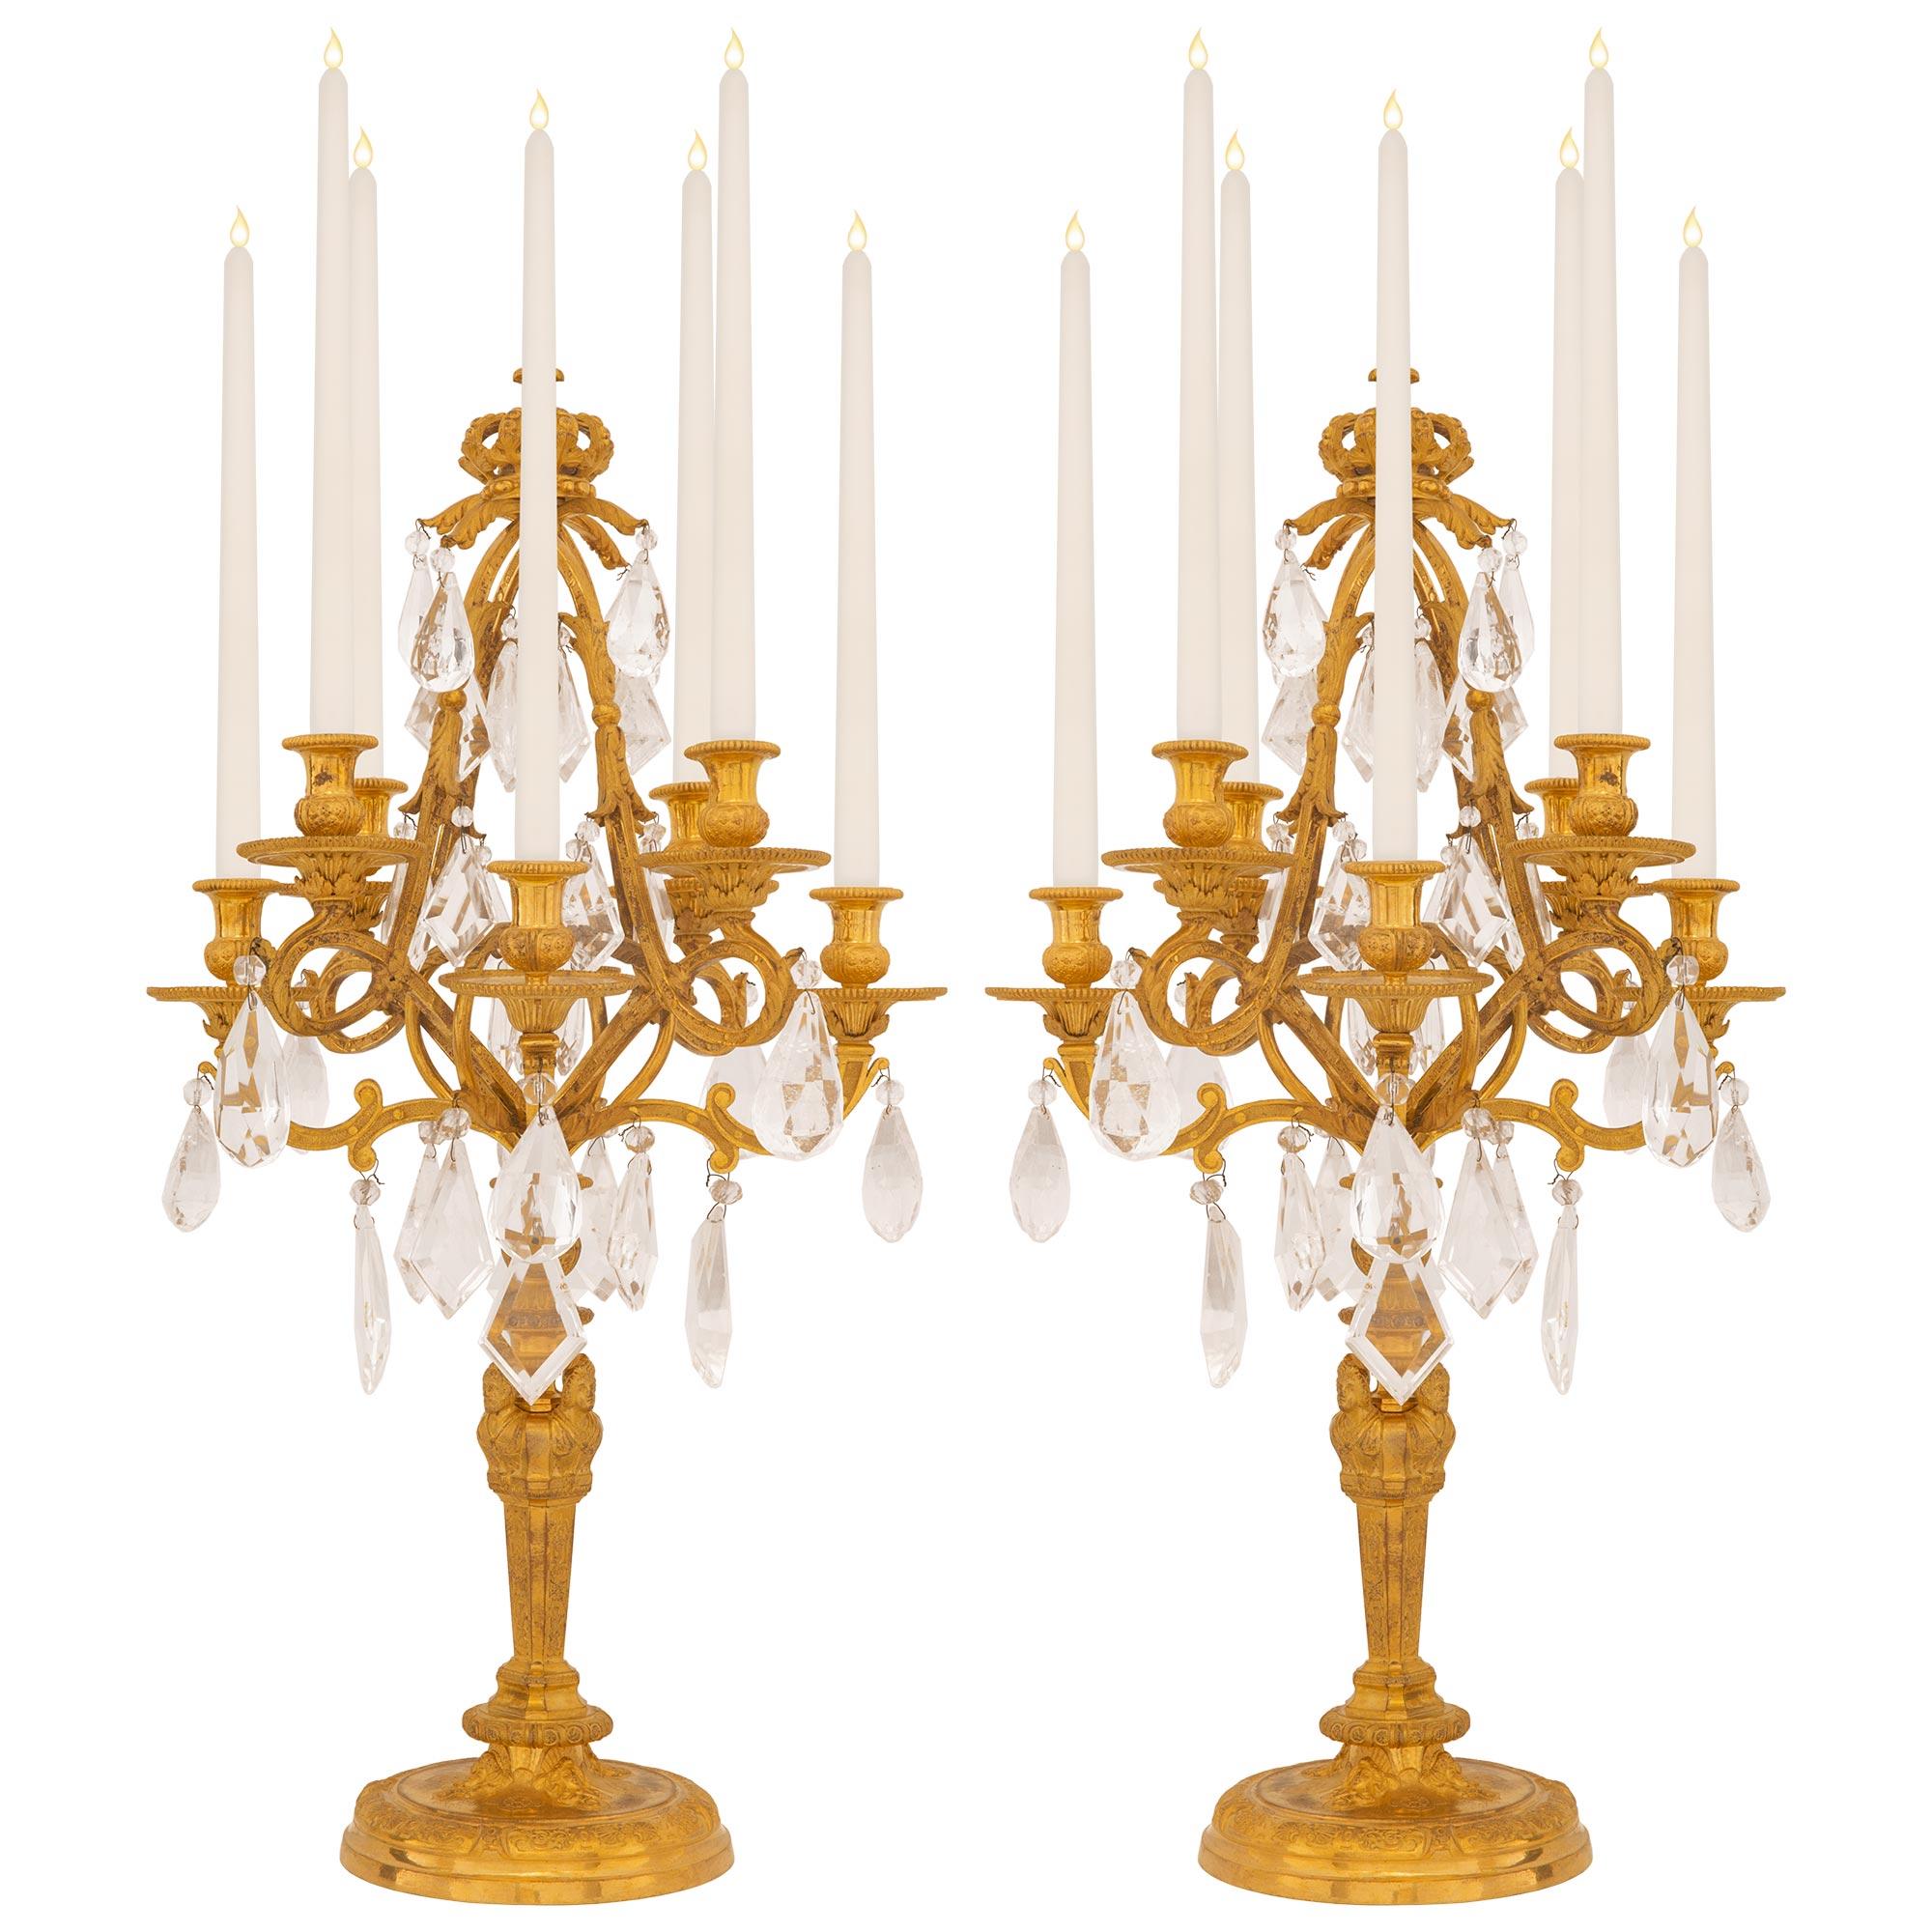 Pair Of French 17th Century Louis XIV Period Ormolu And Rock Crystal Candelabras For Sale 4